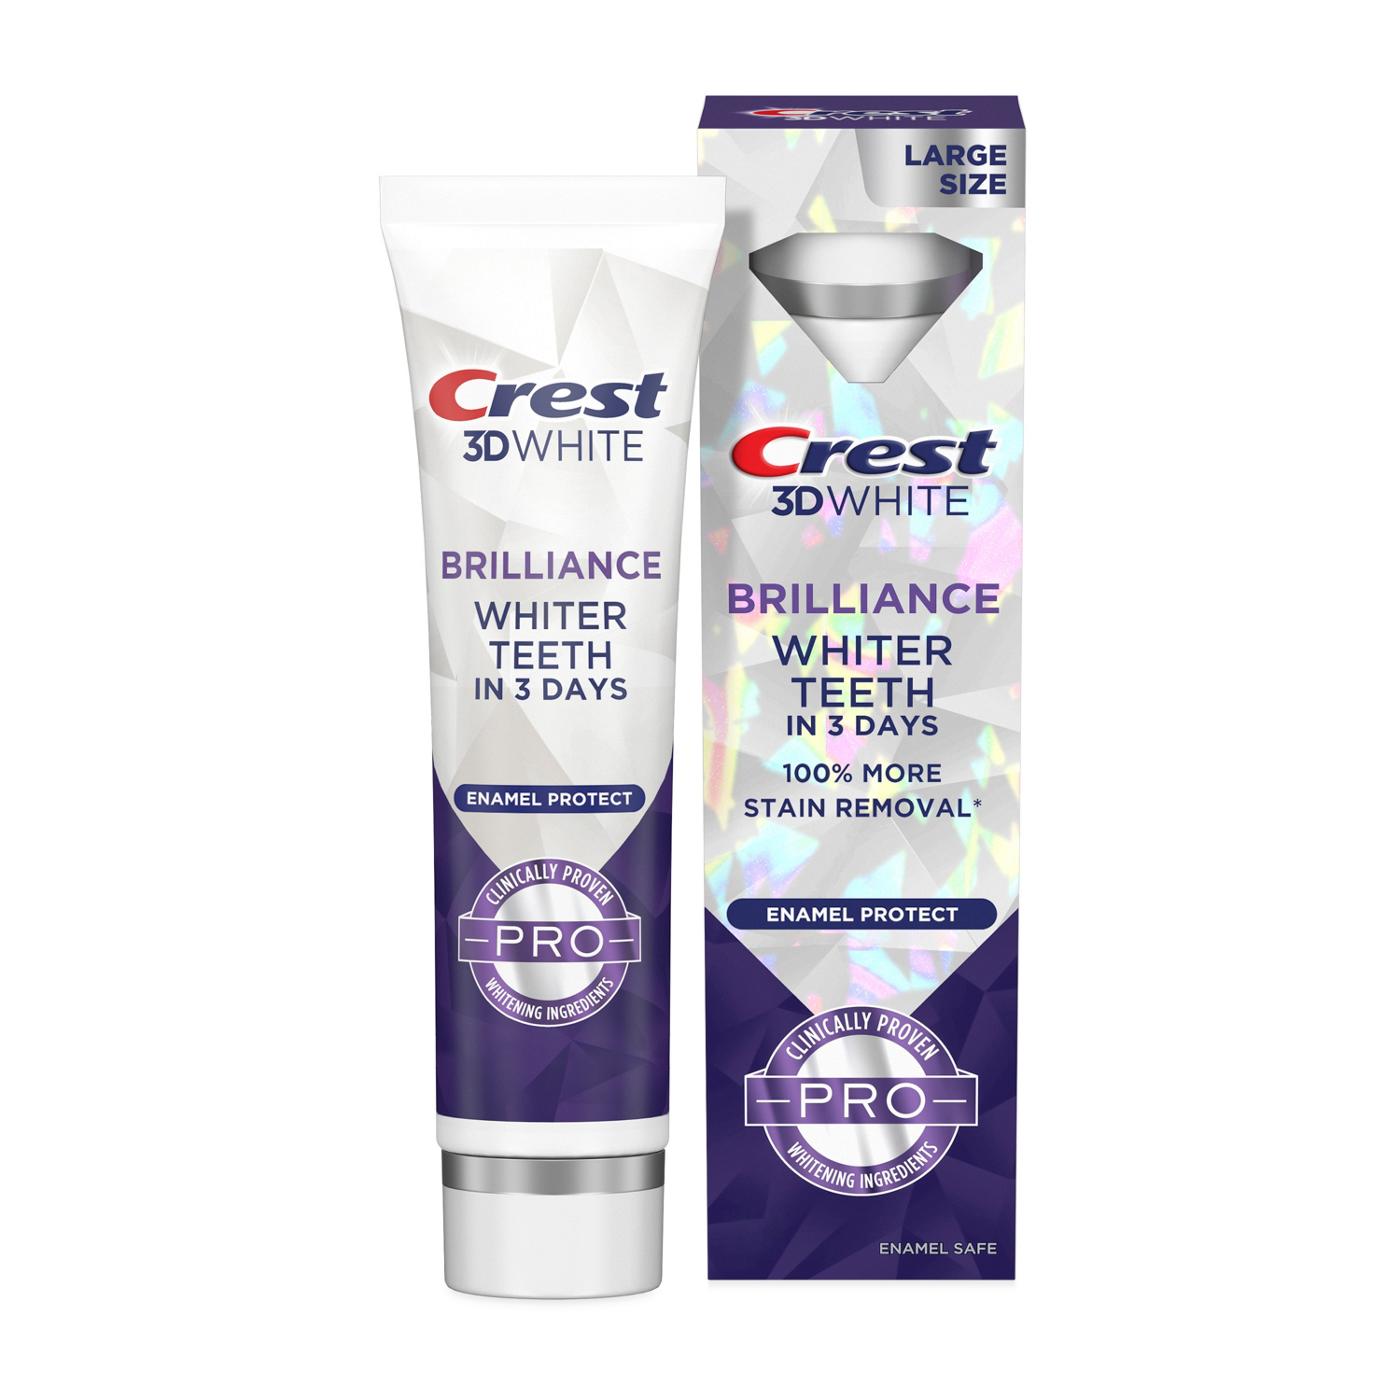 Crest 3D White Brilliance Toothpaste - Enamel Protect; image 2 of 8